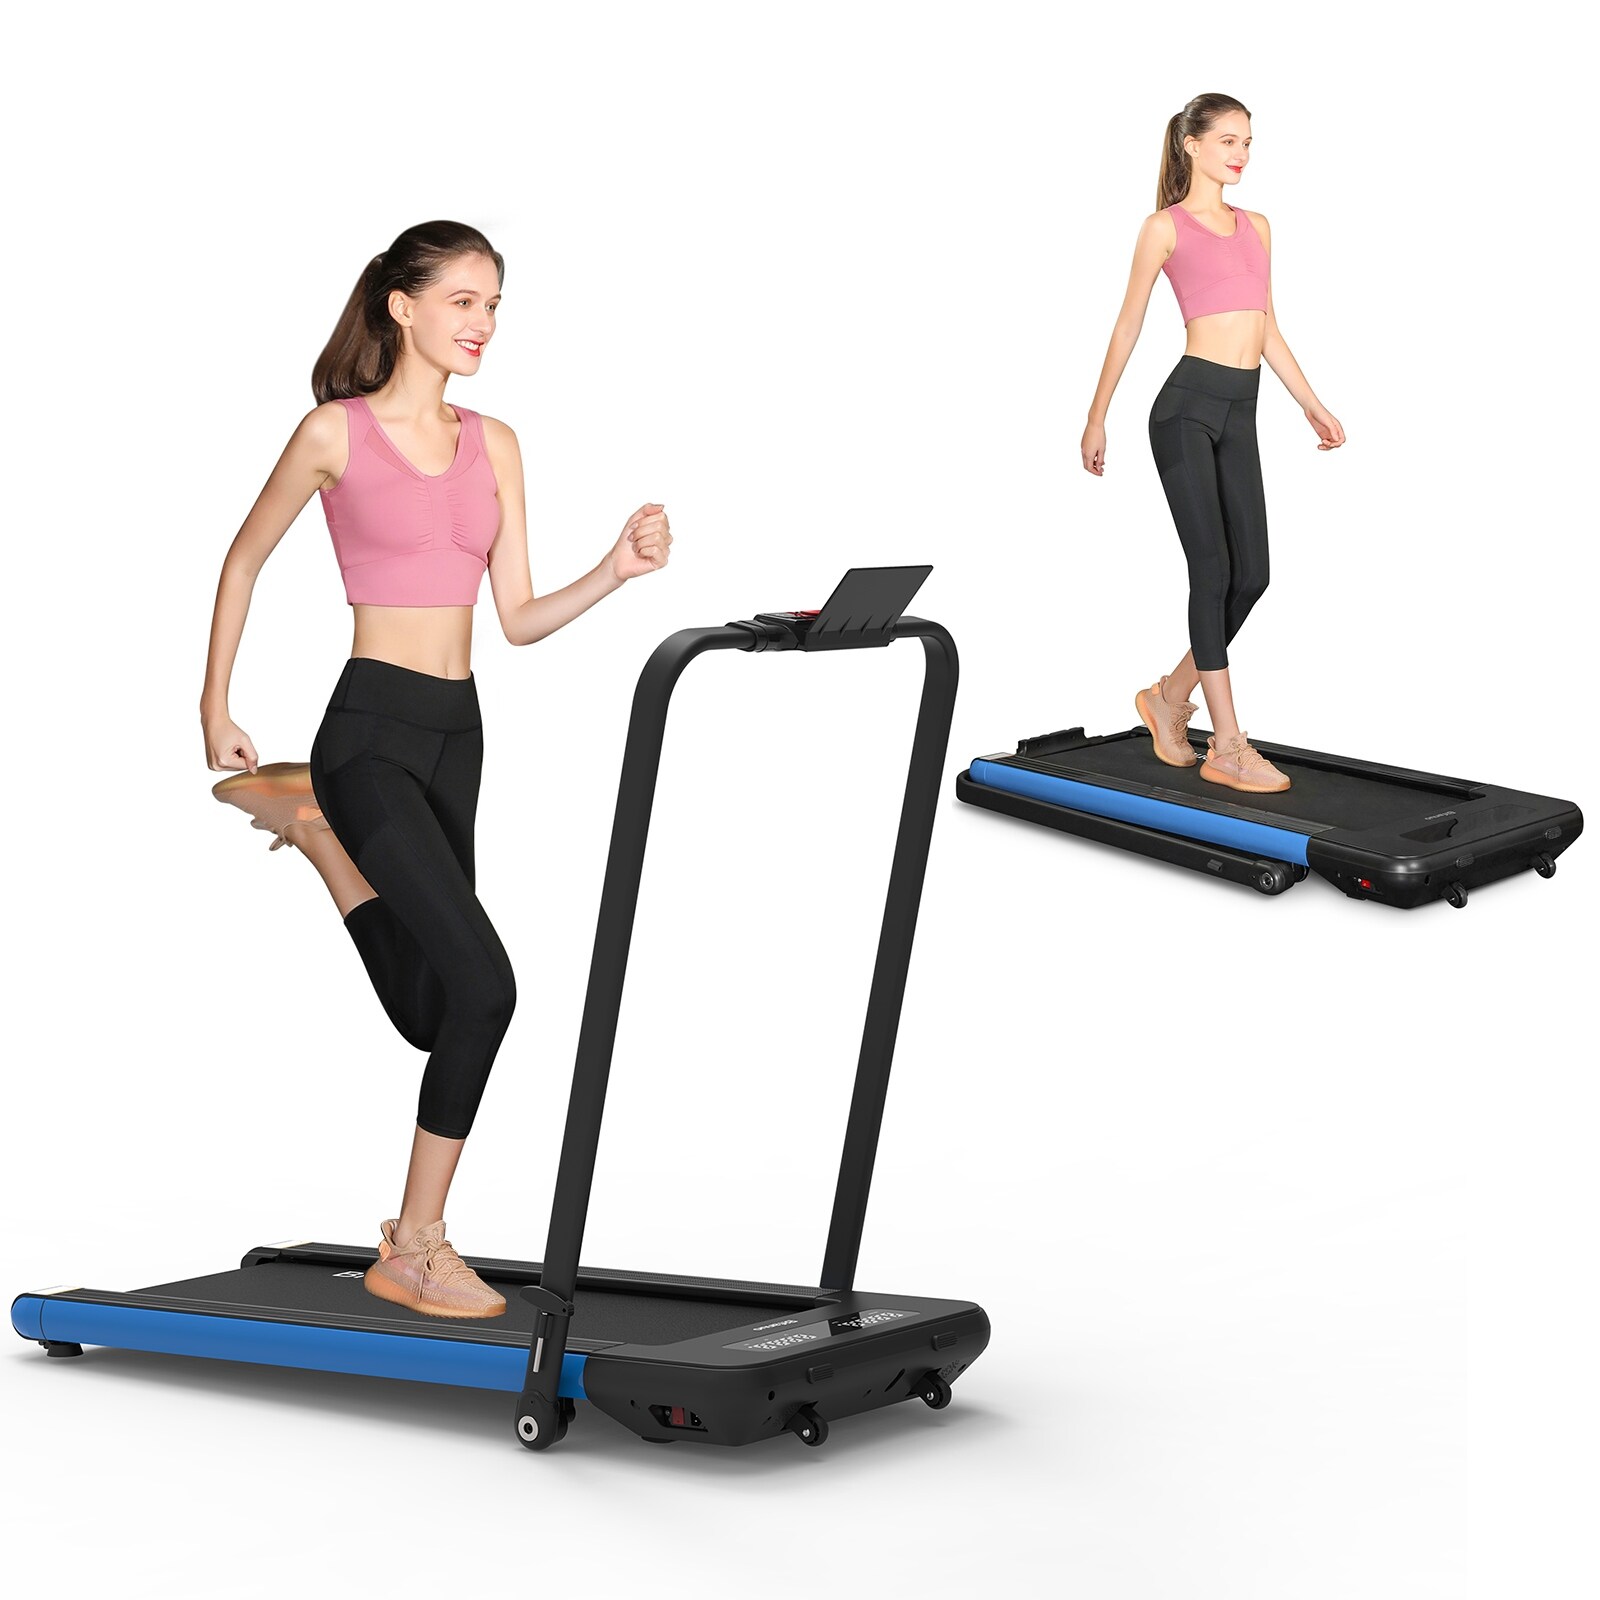 OppsDecor Treadmill for Home Electric Folding Treadmill Running Machine Fitness Exercise Machine with LCD Display for Home Gym Office 